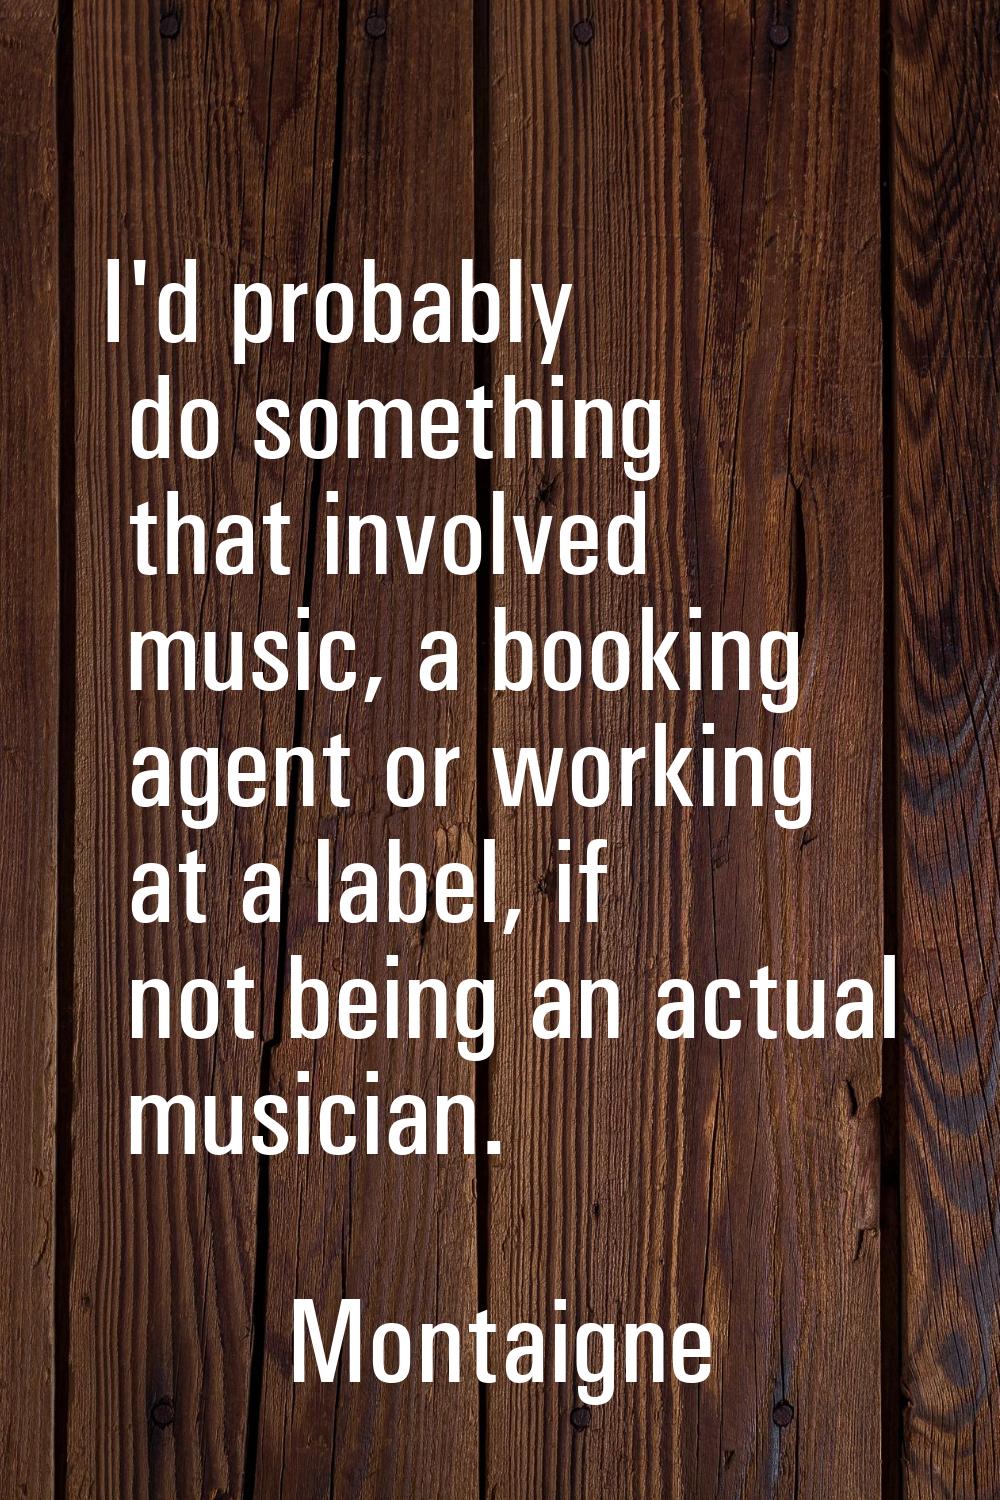 I'd probably do something that involved music, a booking agent or working at a label, if not being 